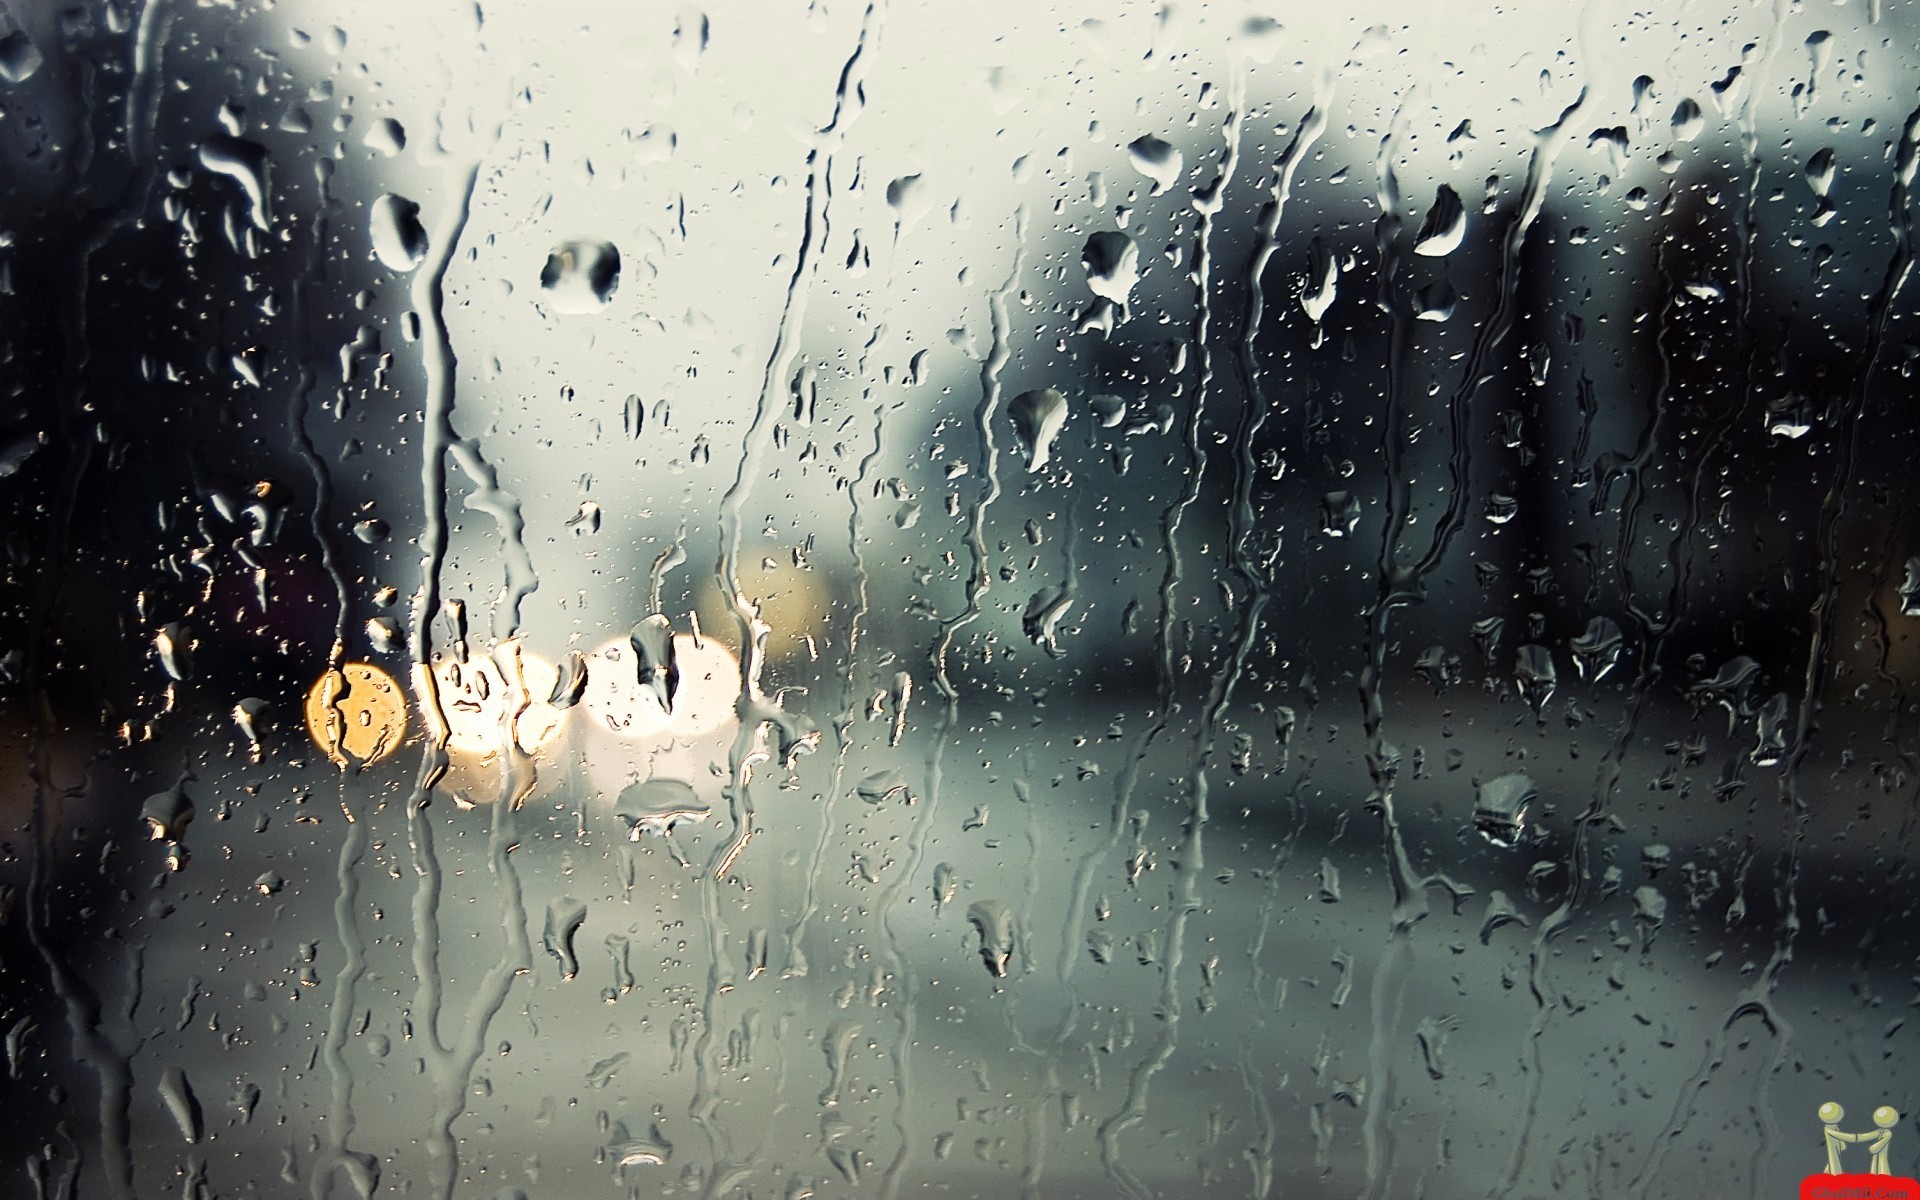 1920x1200 Download Link : Link Image Download. View Original Images : Rain Drops  Falling On Glass High Definition Wallpaper